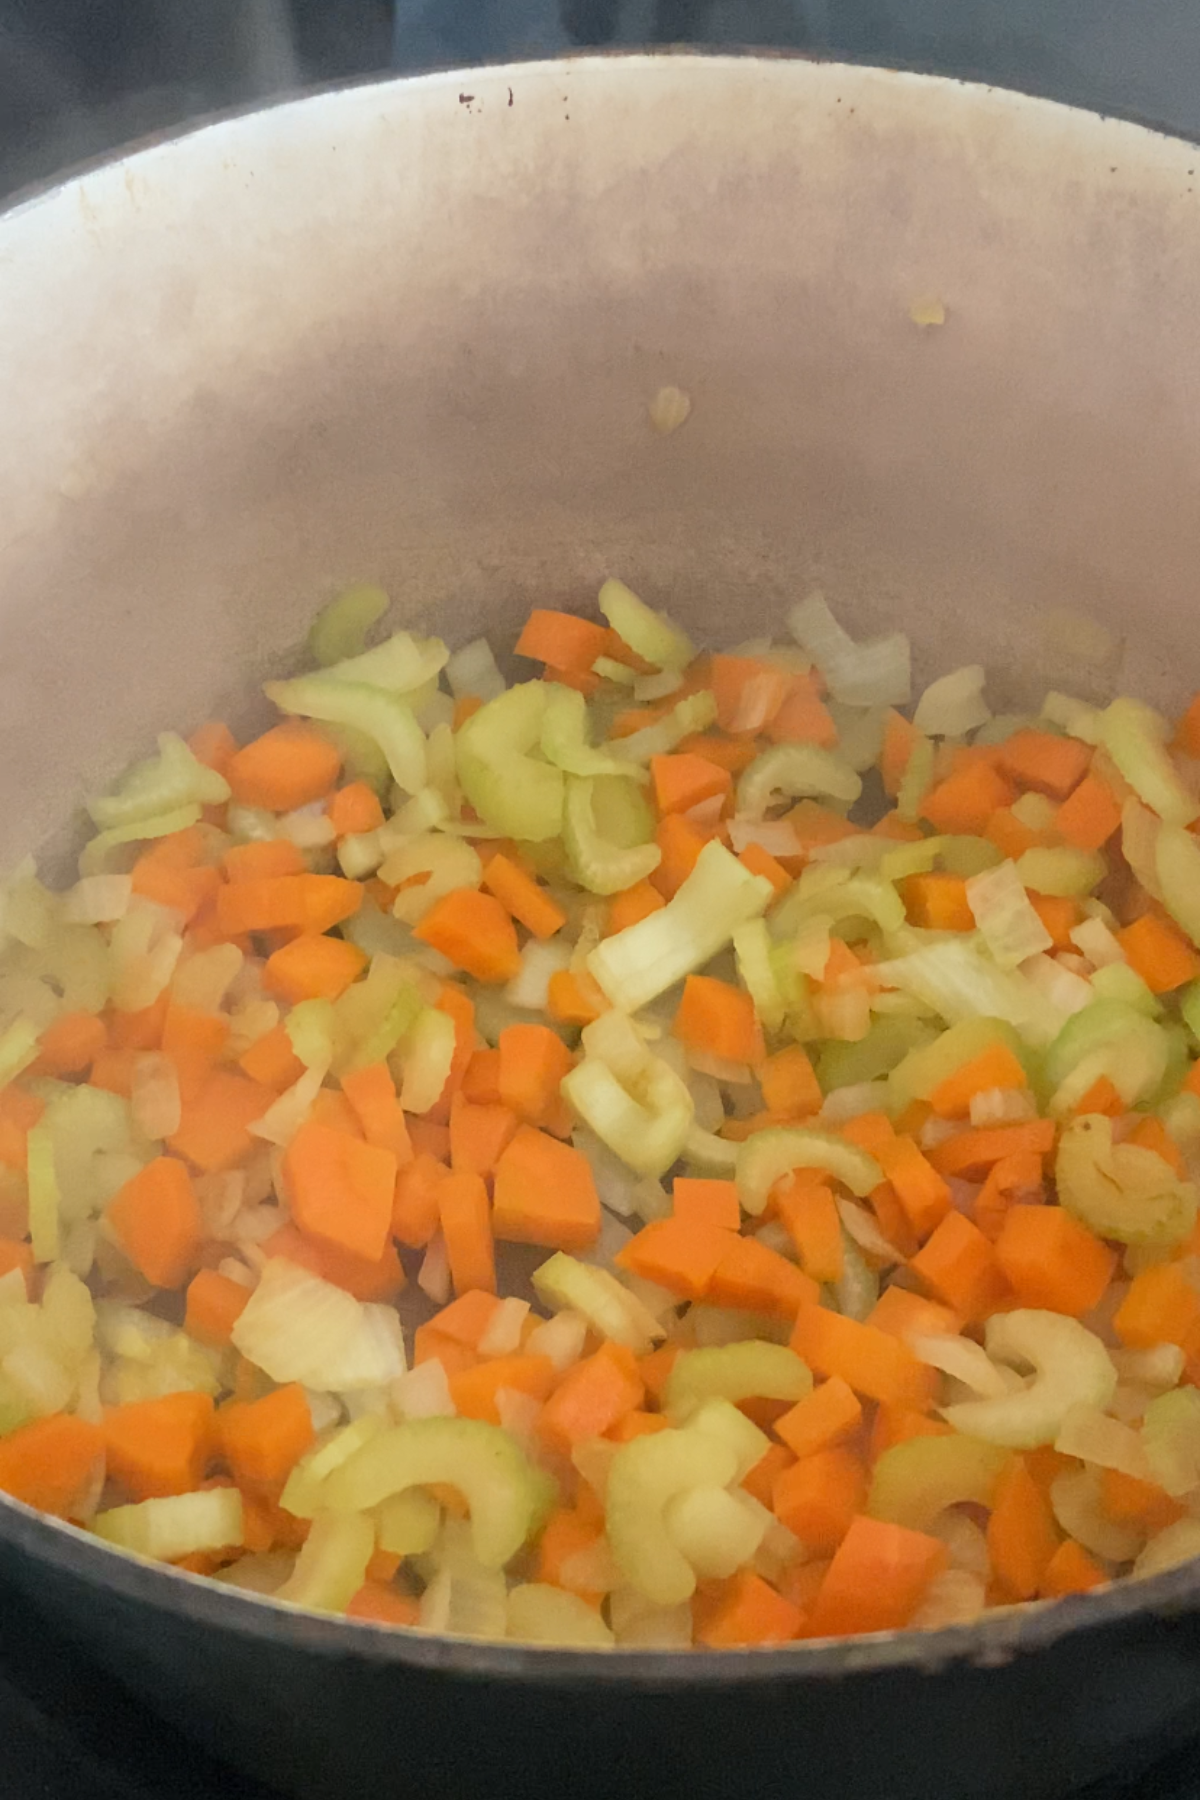 Cooking celery, carrots and onion.